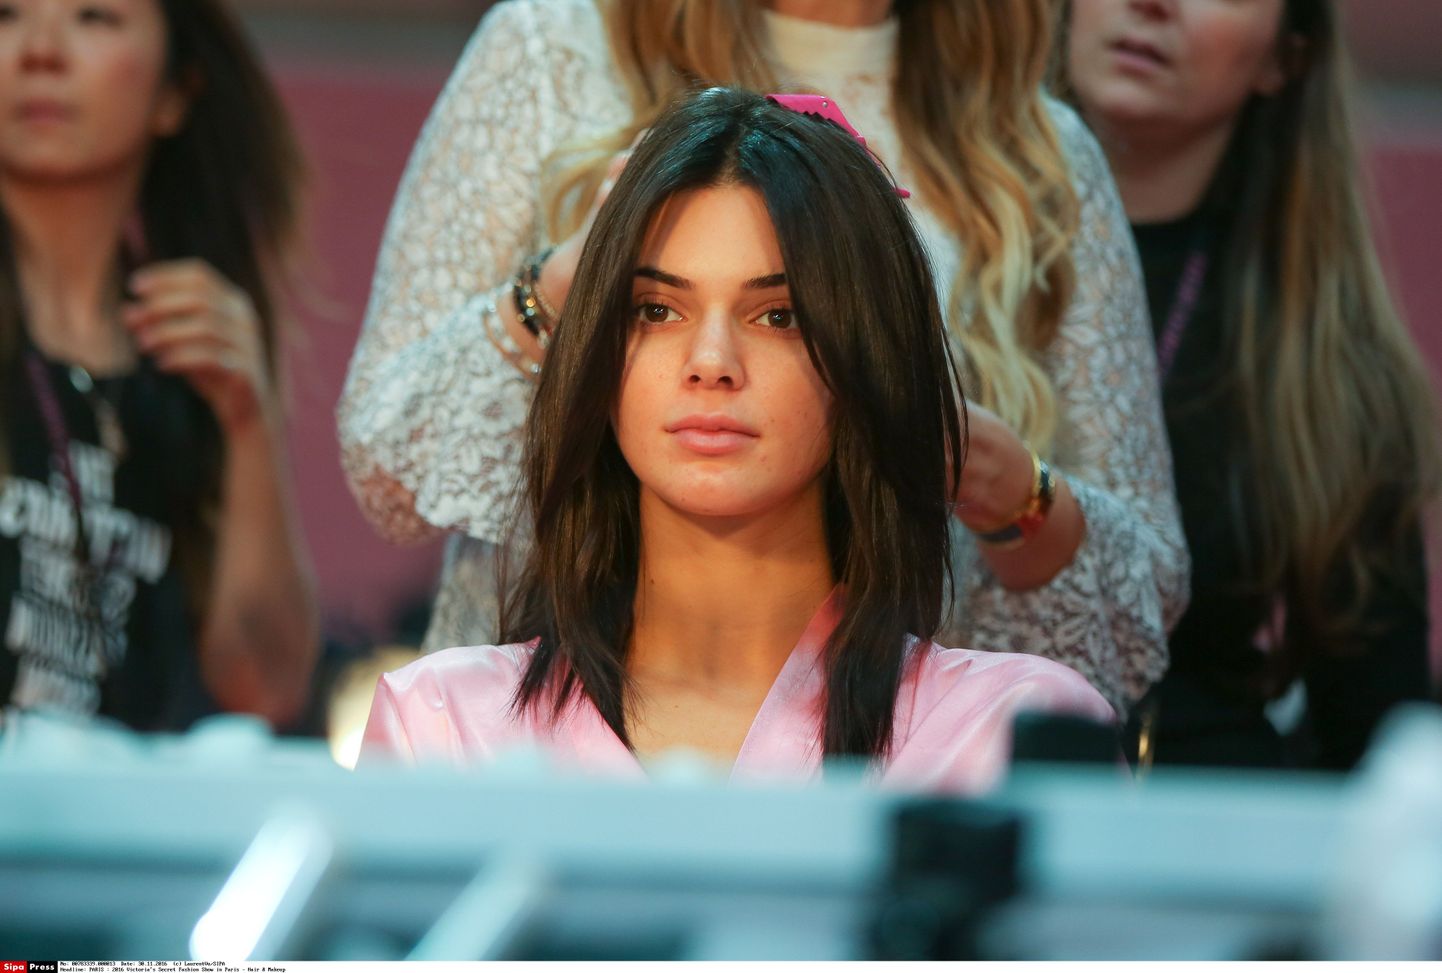 Kendall Jenner has her Hair & Makeup done prior the 2016 Victoria's Secret Fashion Show at the Grand Palais in Paris, FRANCE - 30/11/2016.//PLV_VU_111309/Credit:LaurentVu/SIPA/1611301459